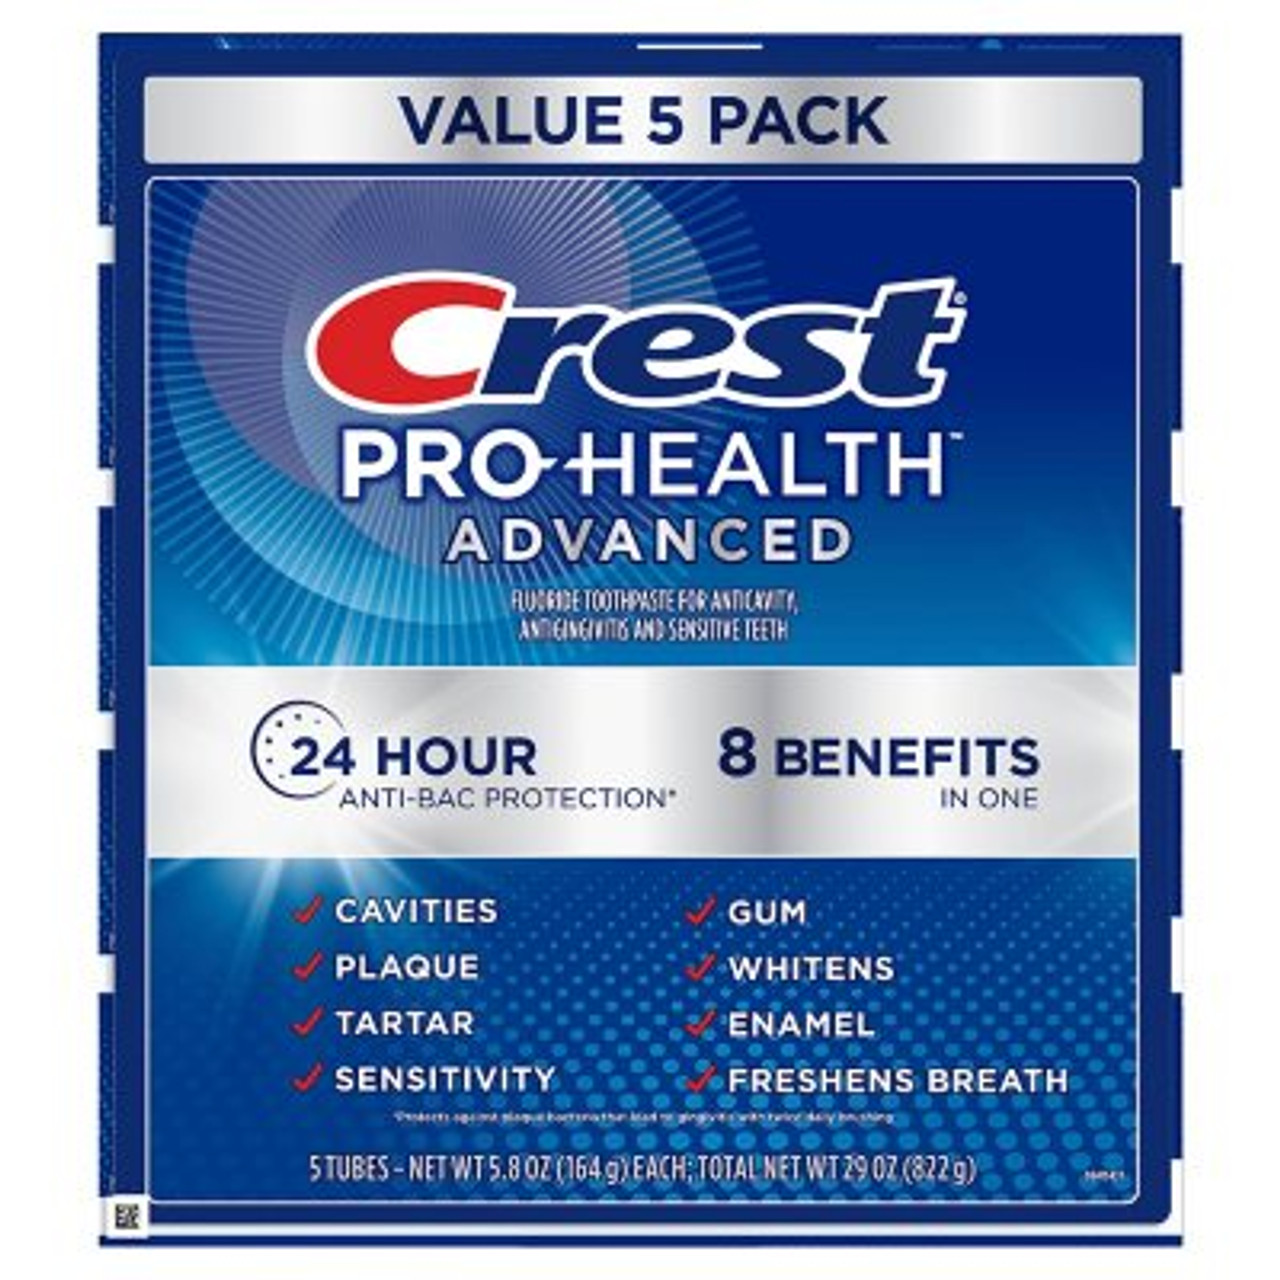 Crest Pro-Health Toothpaste, Advanced White for Teeth Whitening (5.8 oz., 5 pk.) - [From 57.00 - Choose pk Qty ] - *Ships from Miami